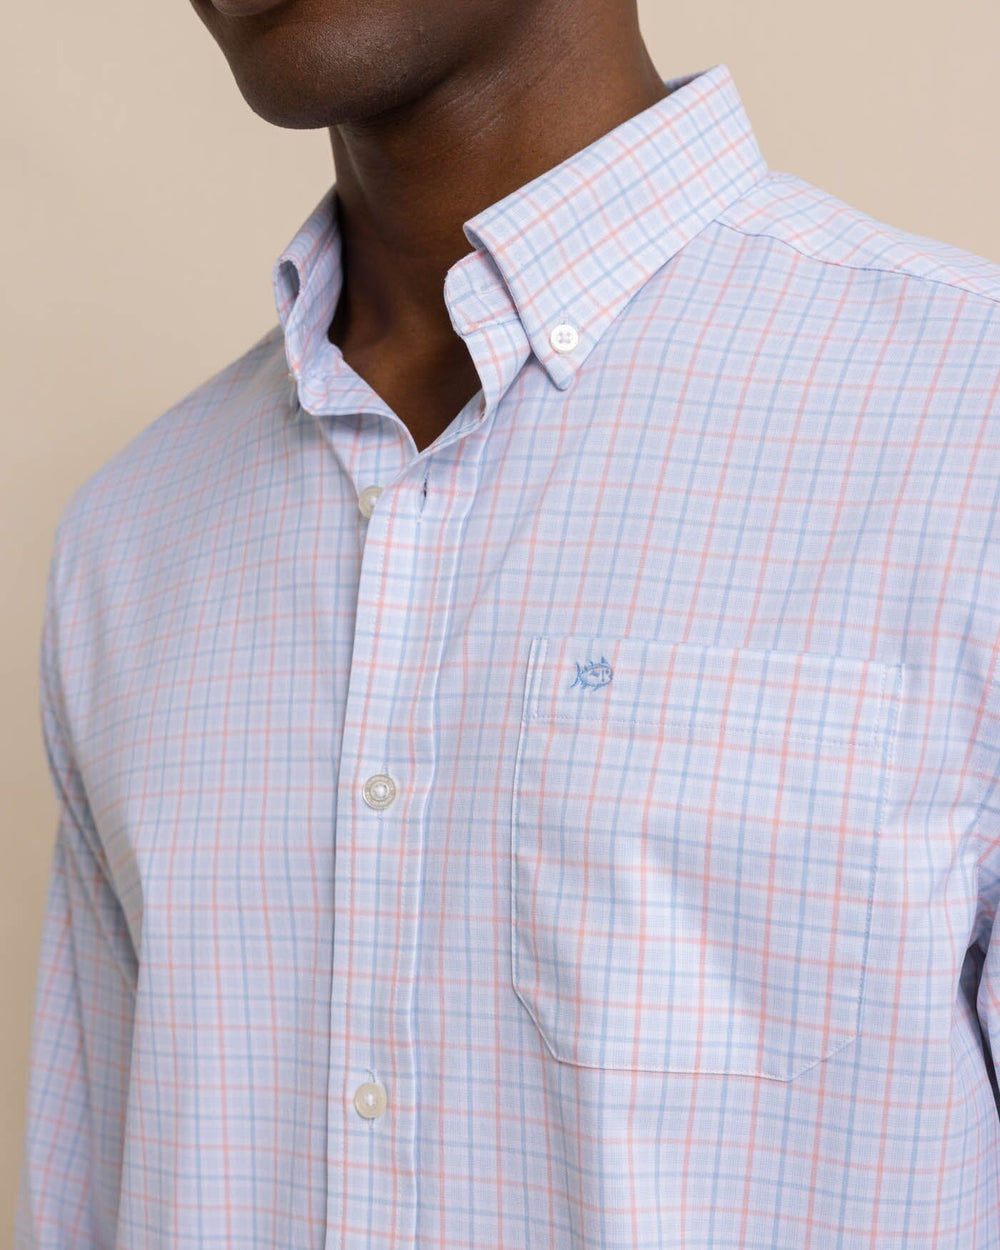 The detail view of the Southern Tide Intercoastal Falls Park Plaid Long Sleeve SportShirt by Southern Tide - Clearwater Blue